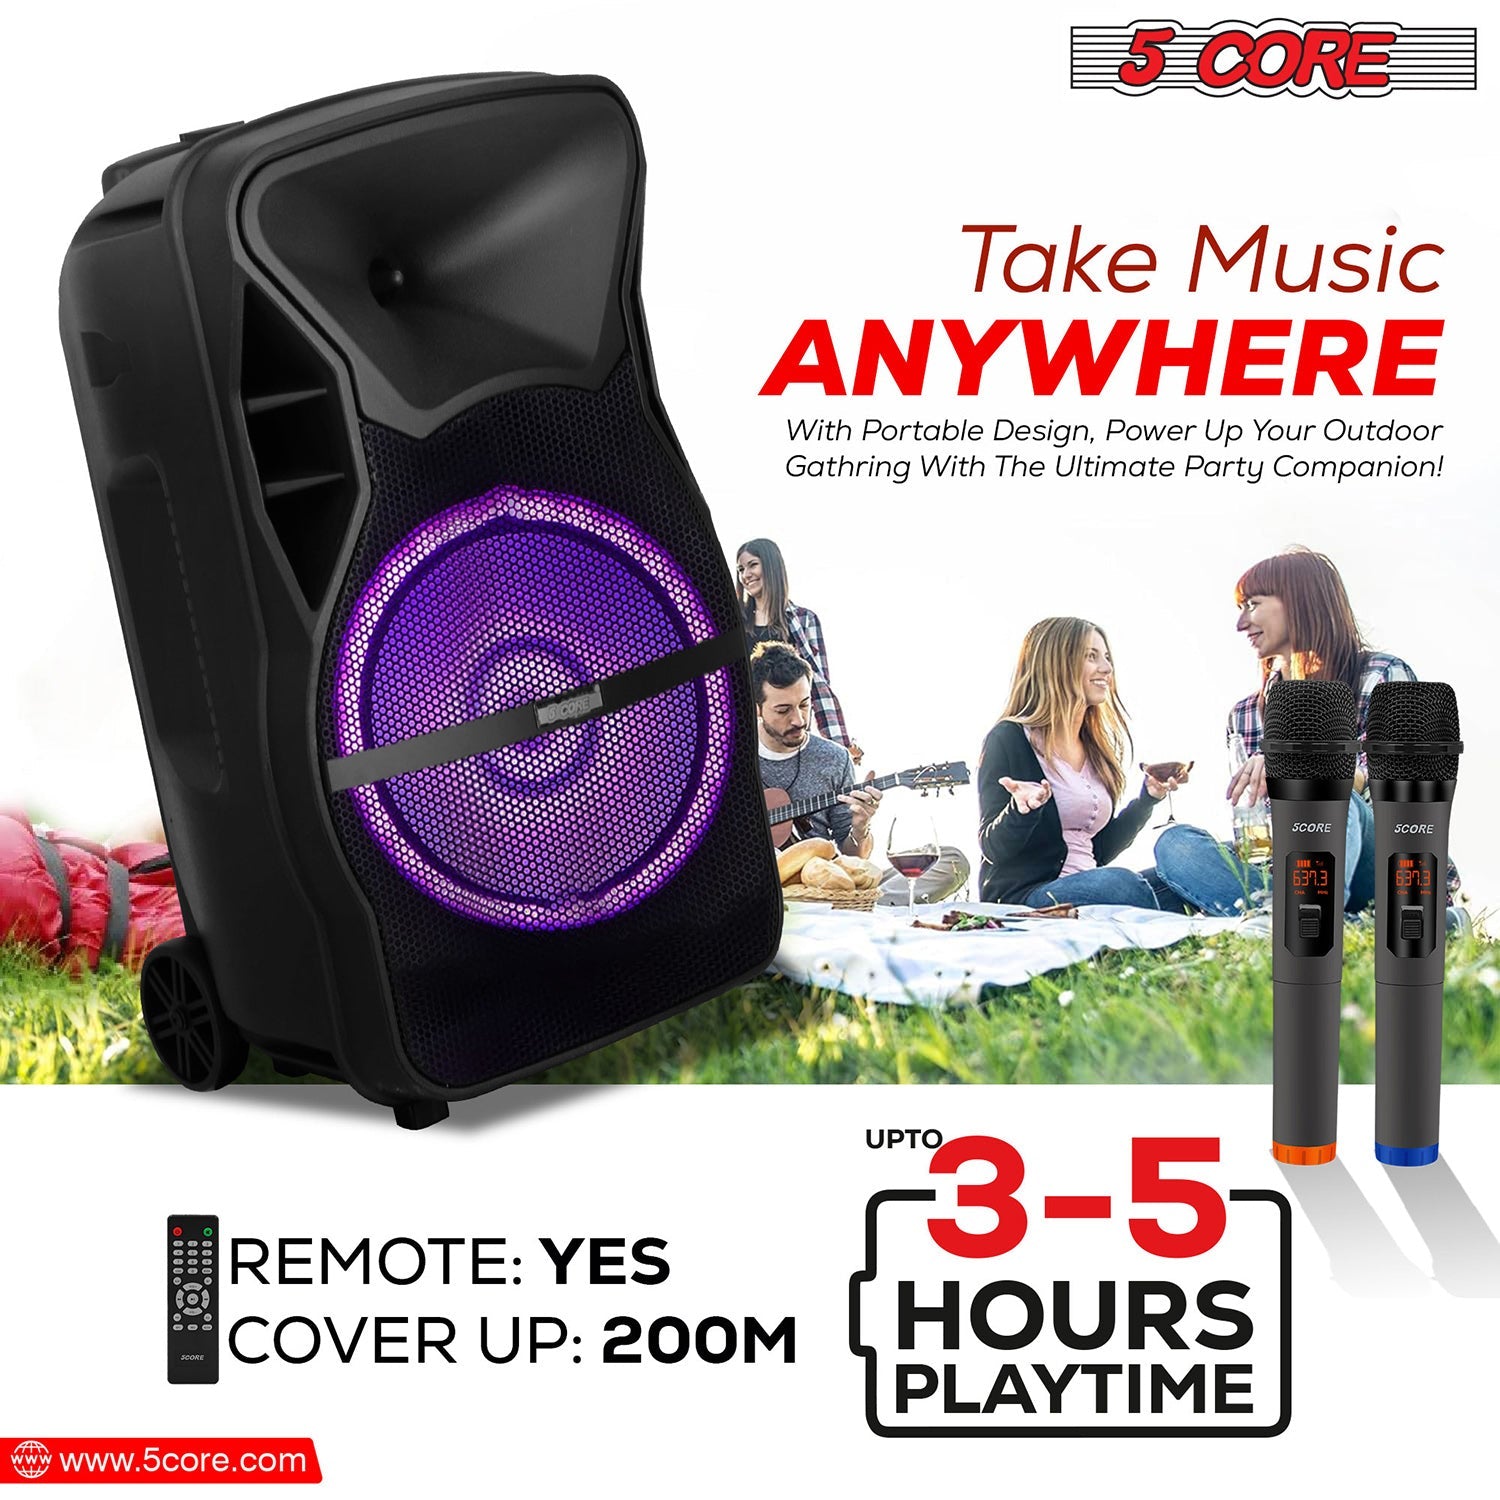 5Core Karaoke Machine: Portable party speaker with Bluetooth, 2 wireless mics, and powerful PA system for DJs.